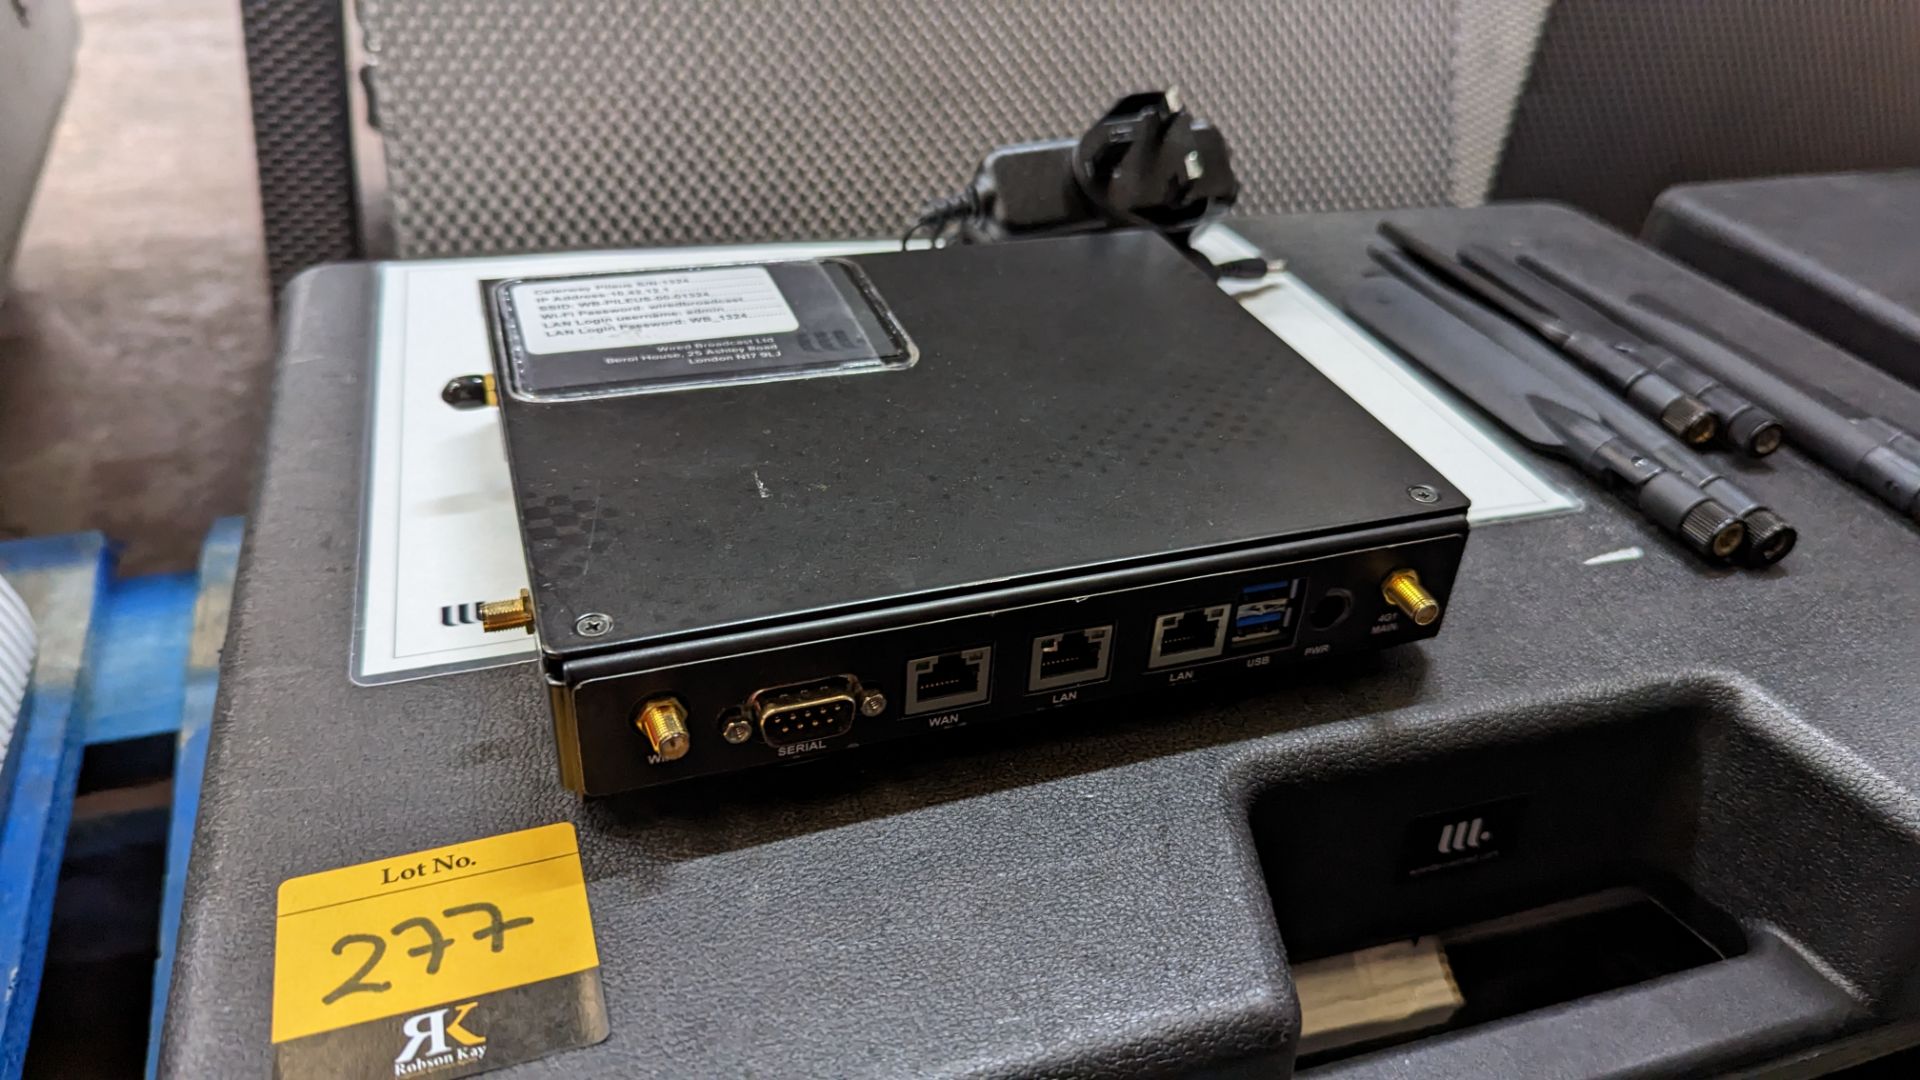 Celerway Pileous modem router, including case, aerials and other accessories - Image 5 of 7